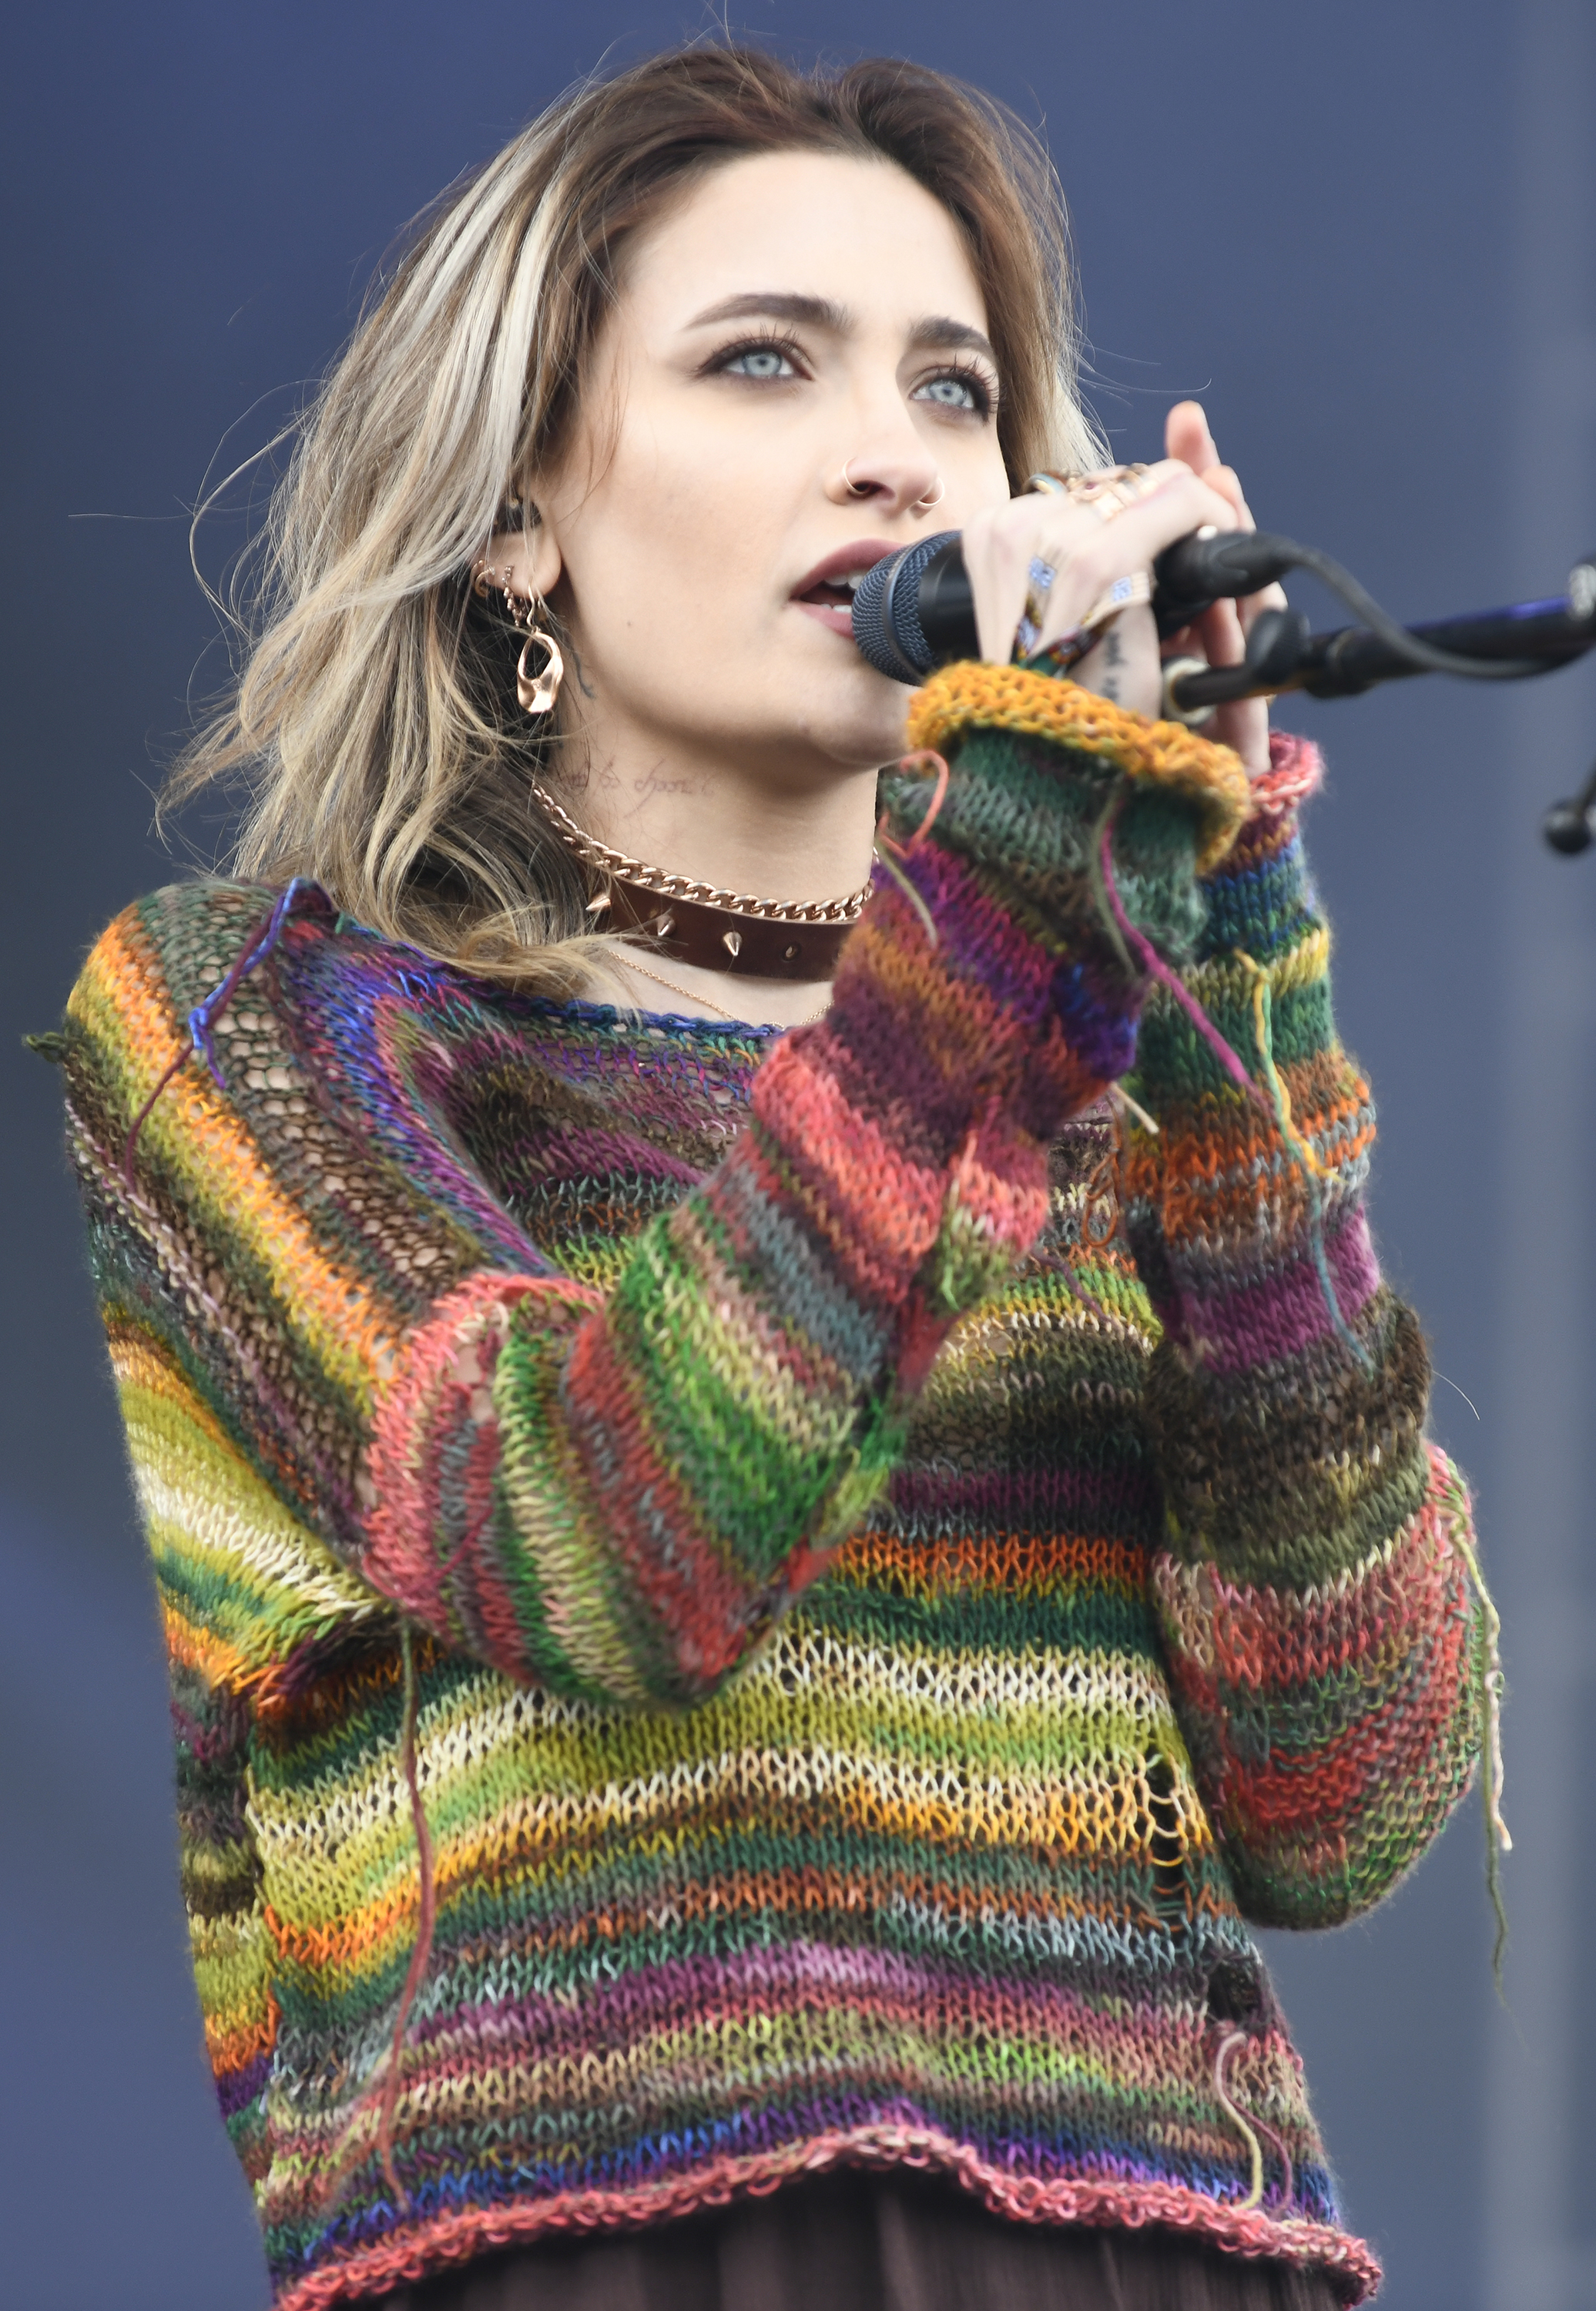 Paris Jackson on February 26, 2023 in Tempe, Arizona. | Source: Getty Images